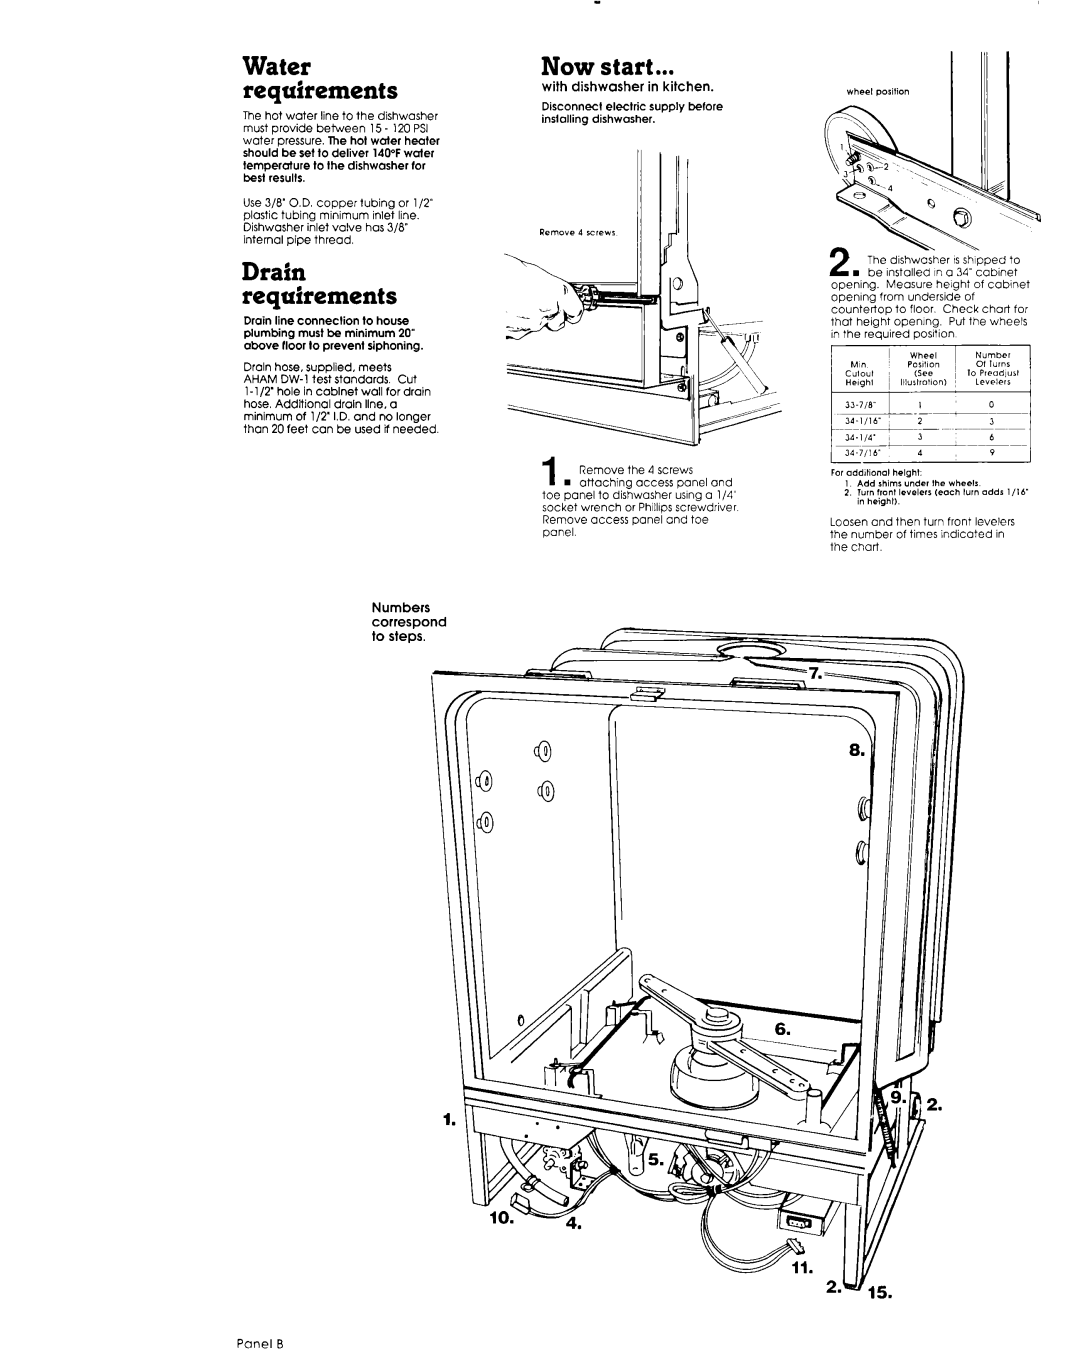 Whirlpool 3369088 installation instructions Now start, Water requirements, Drain requfrements 